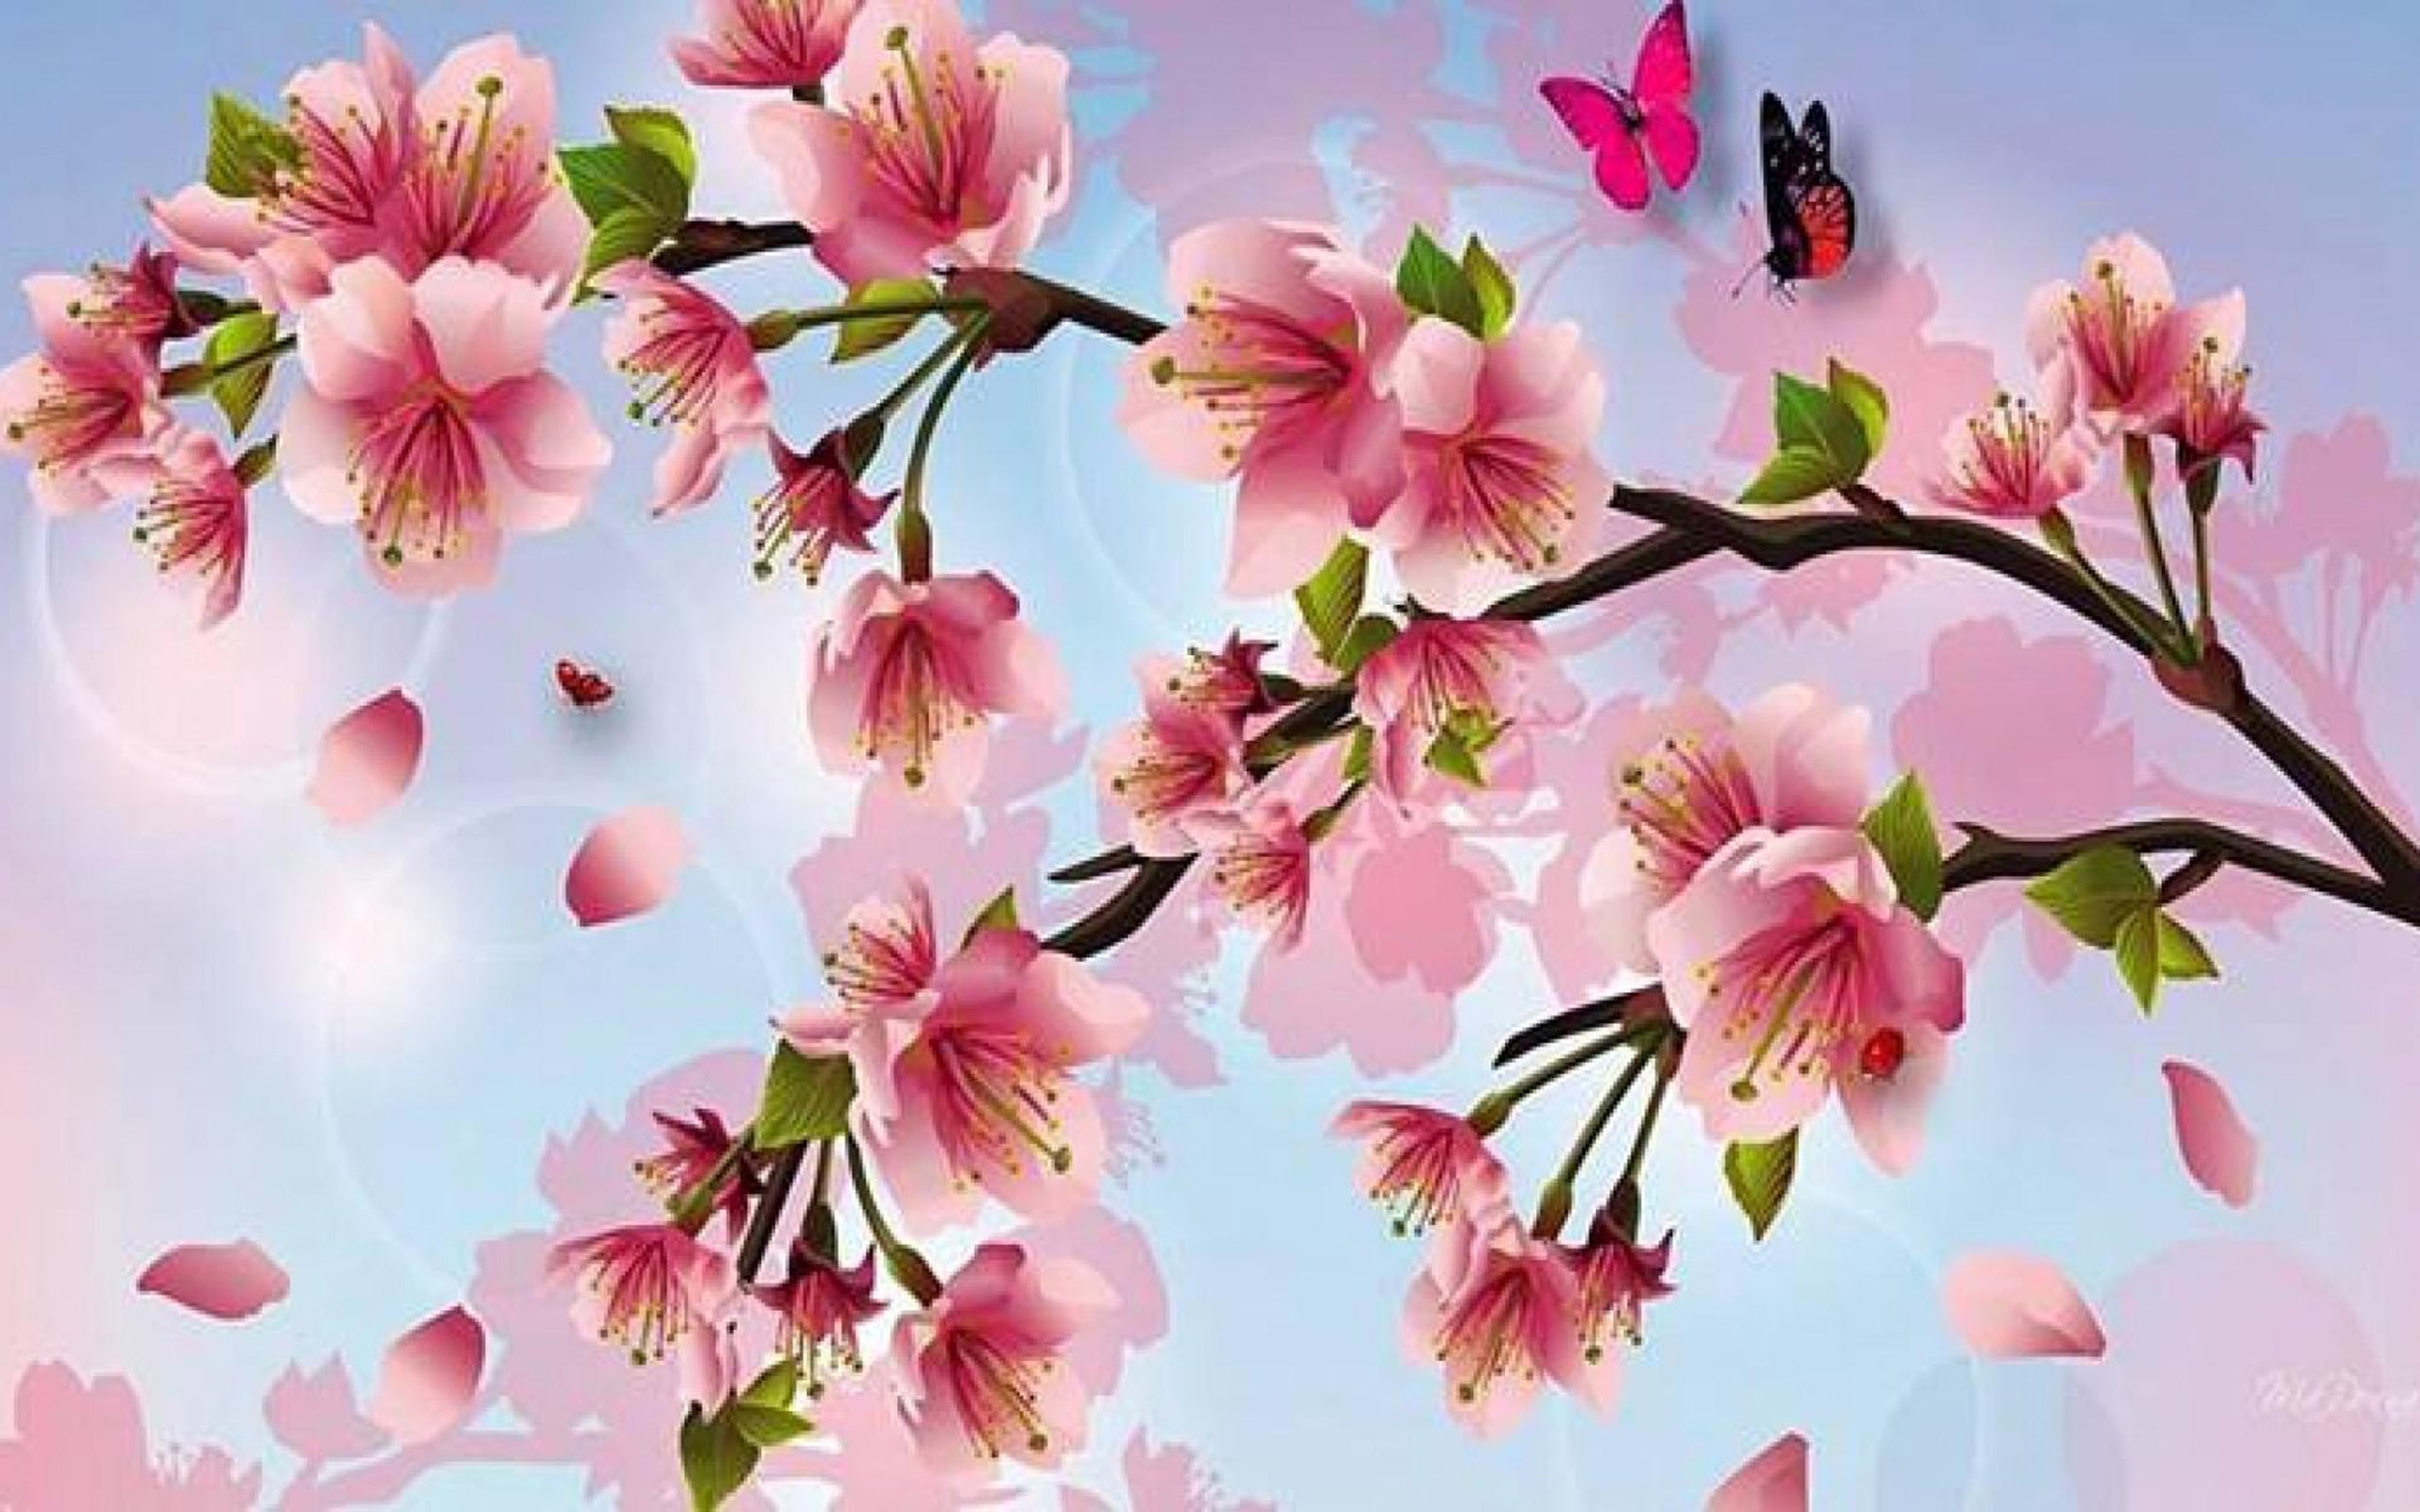 Cherry blossoms painting wallpaper cherry blossom : 